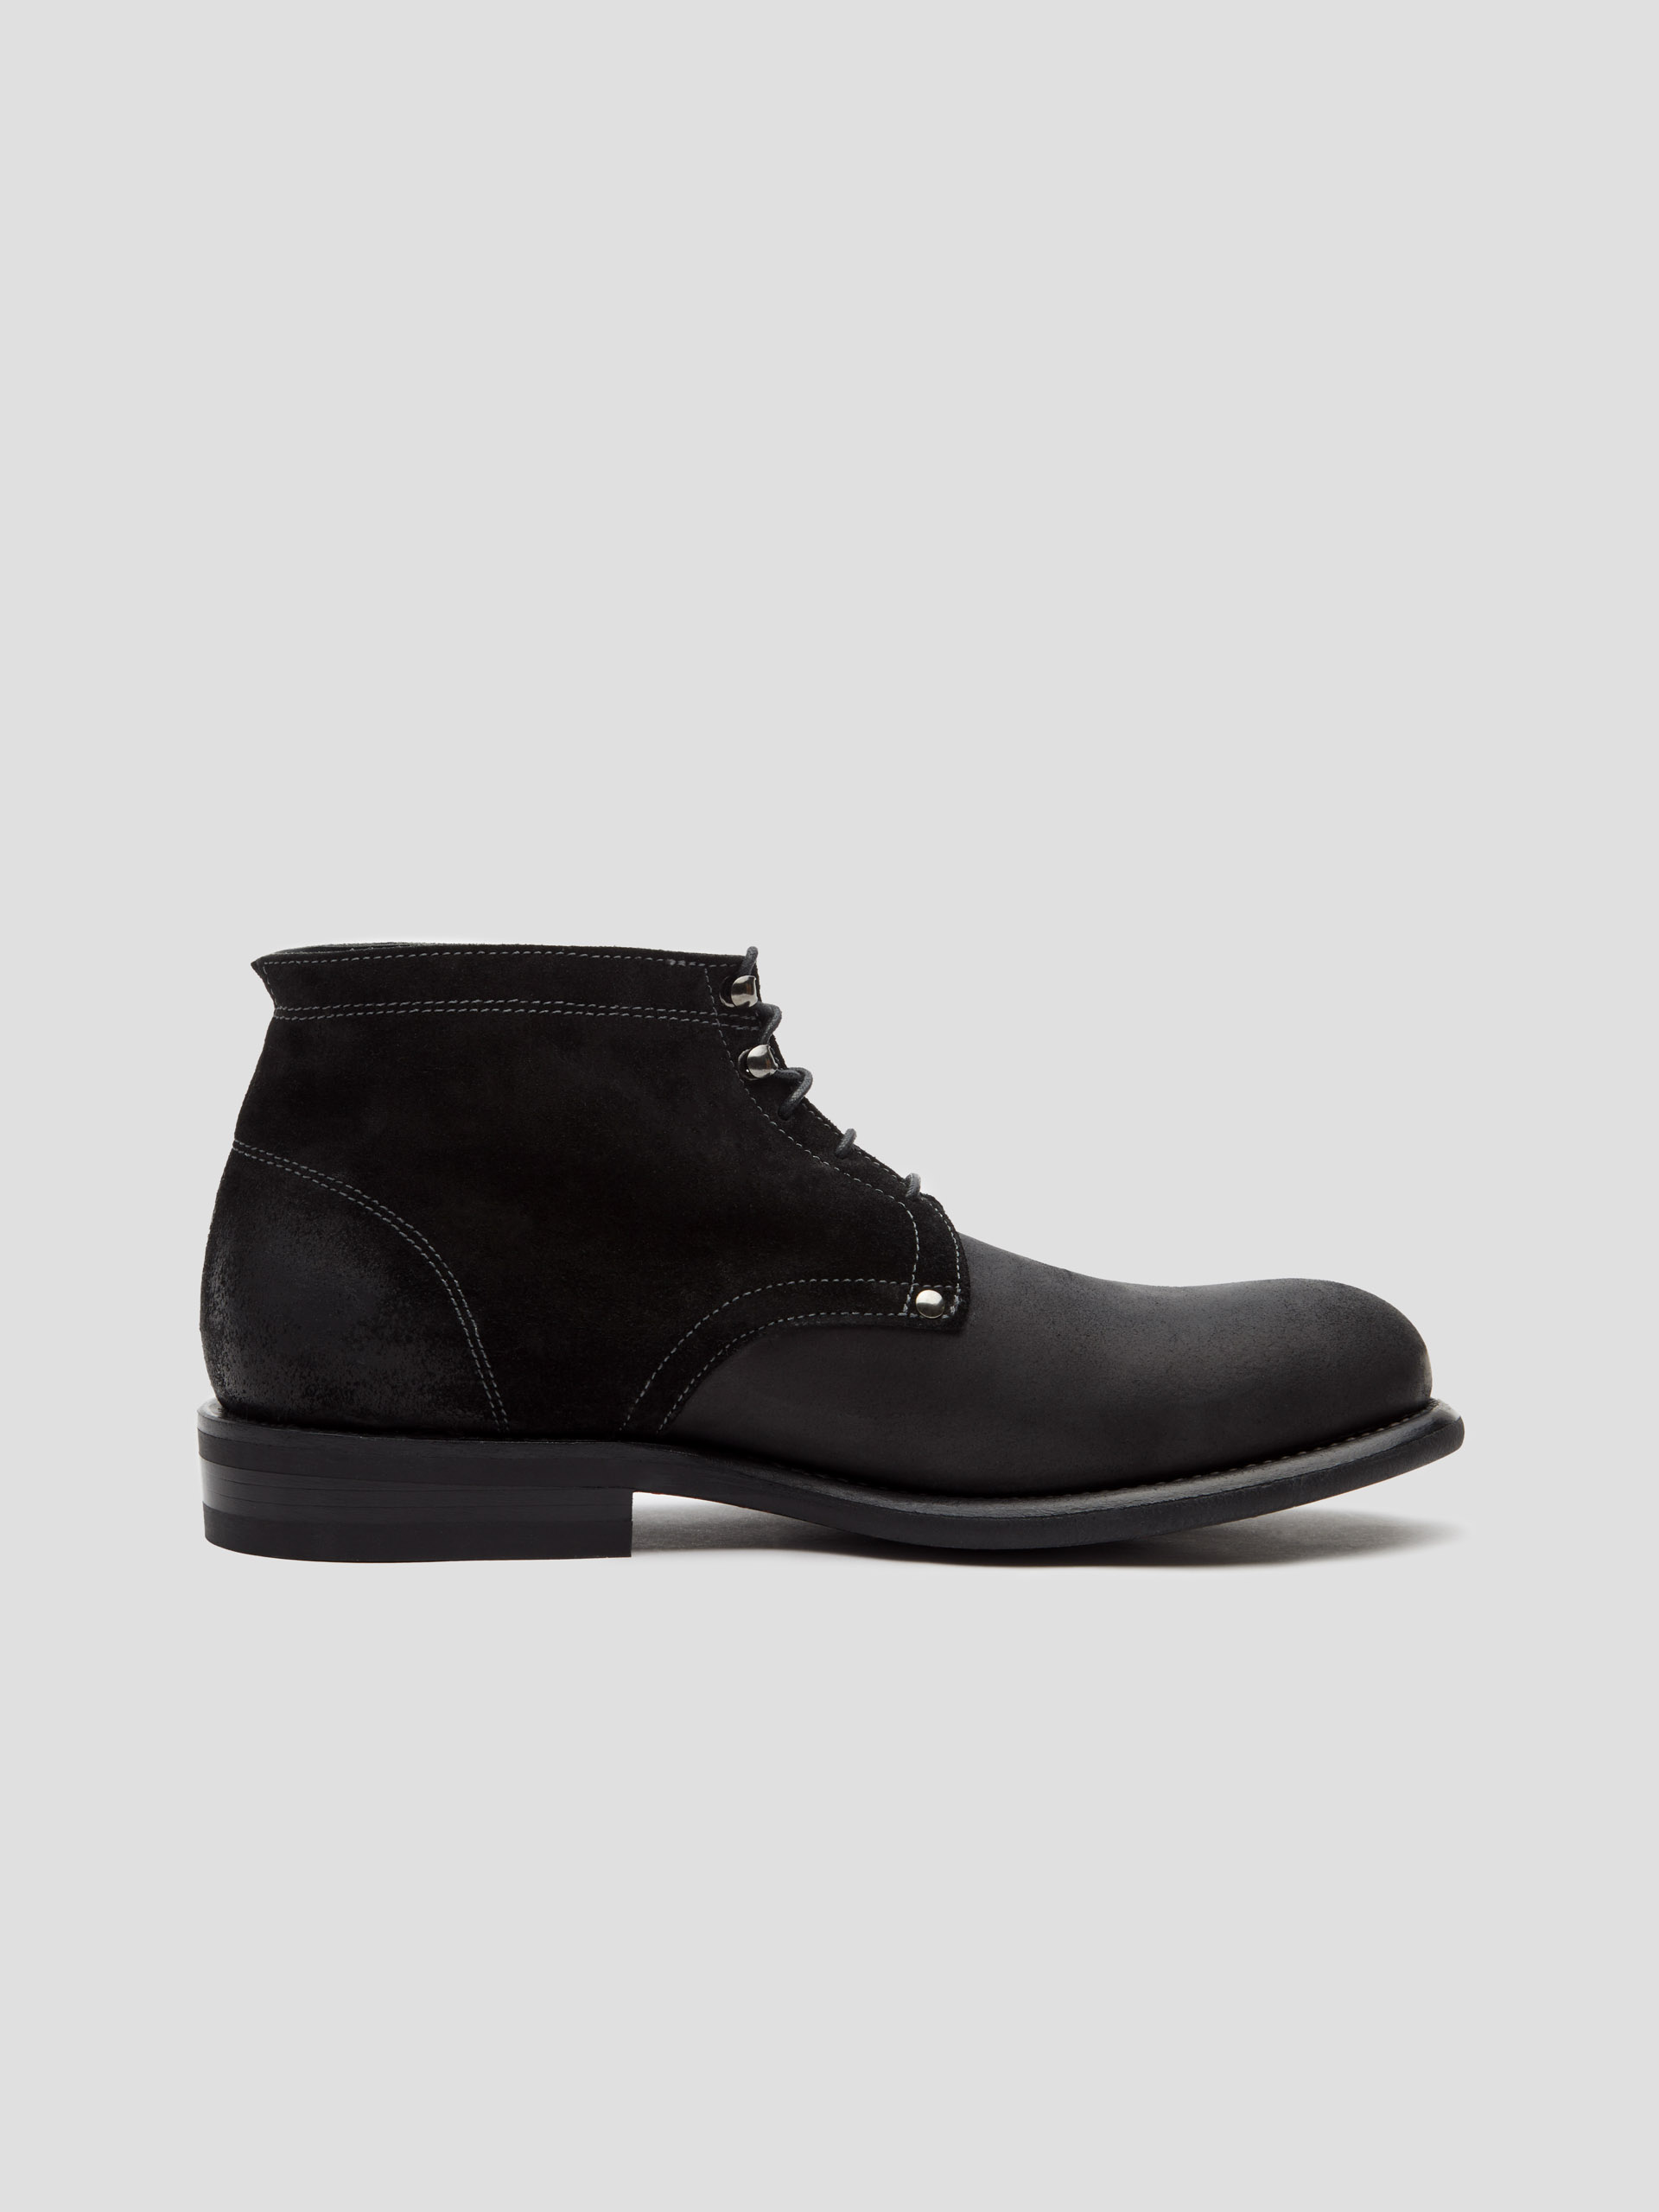 boots 02 suede black (only for men) 스니커즈와 구두